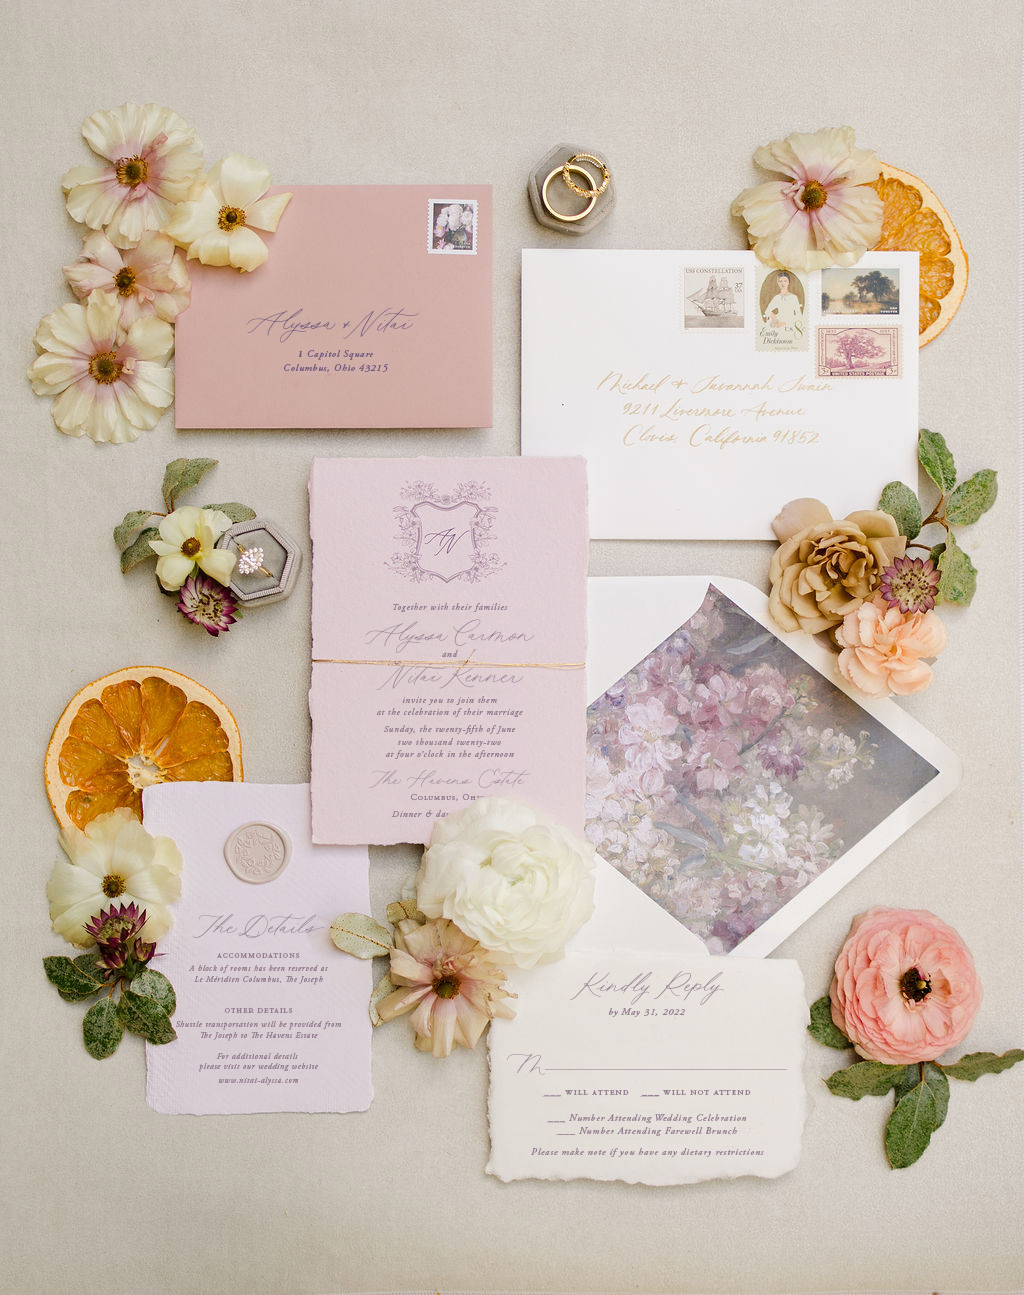 Pricing Postage for Wedding Invitations - How much do you need?